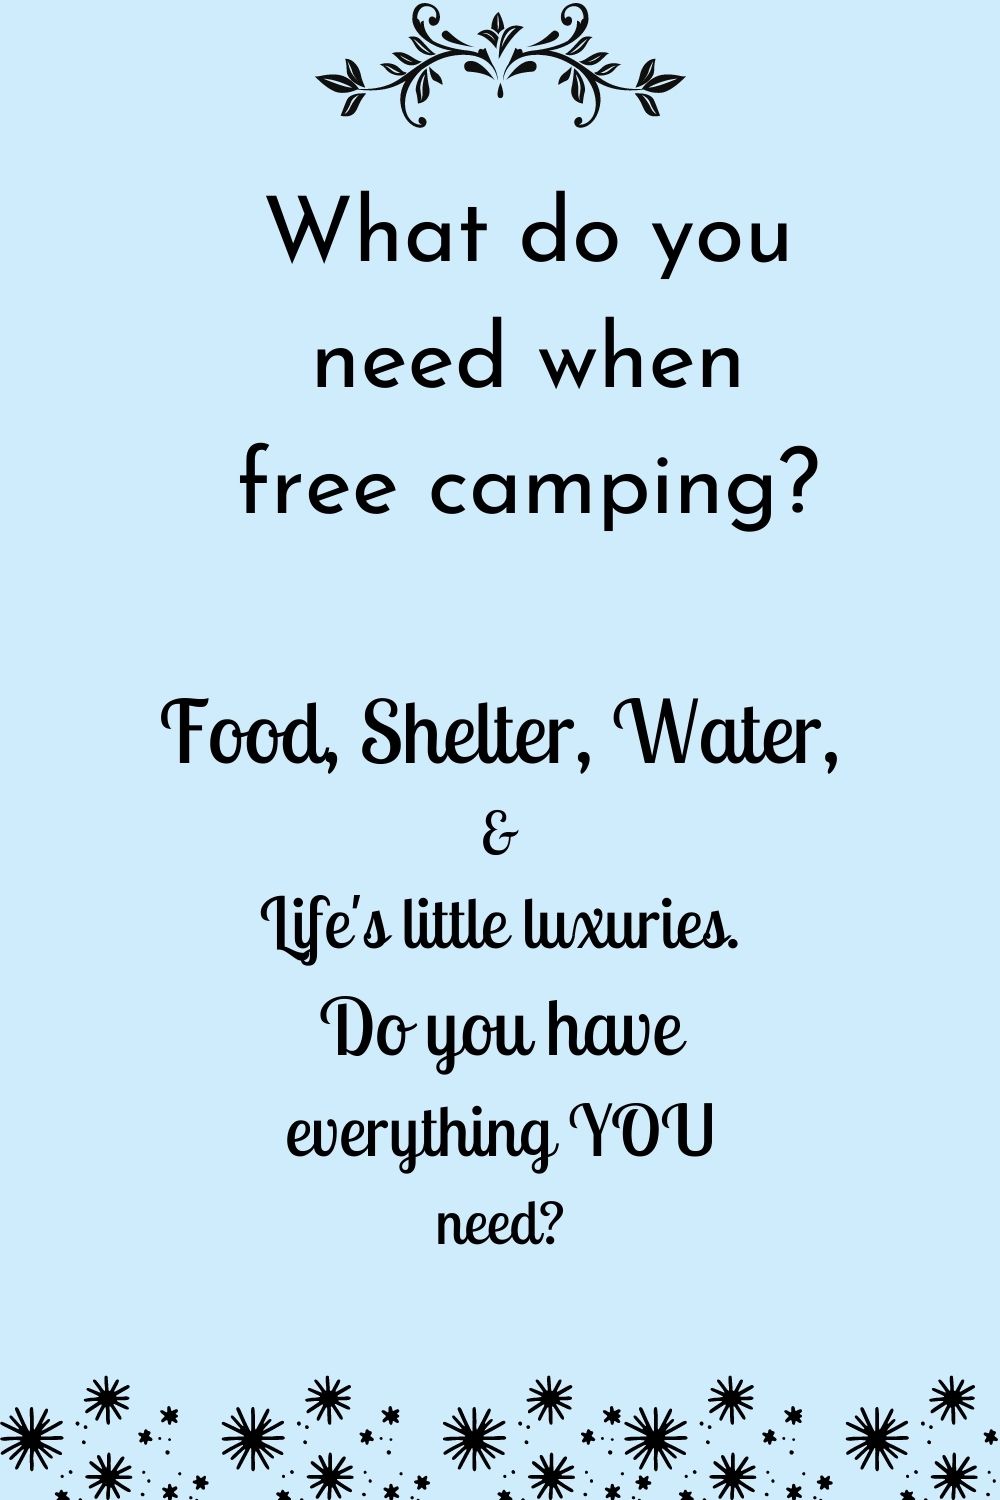 What do you need when free camping